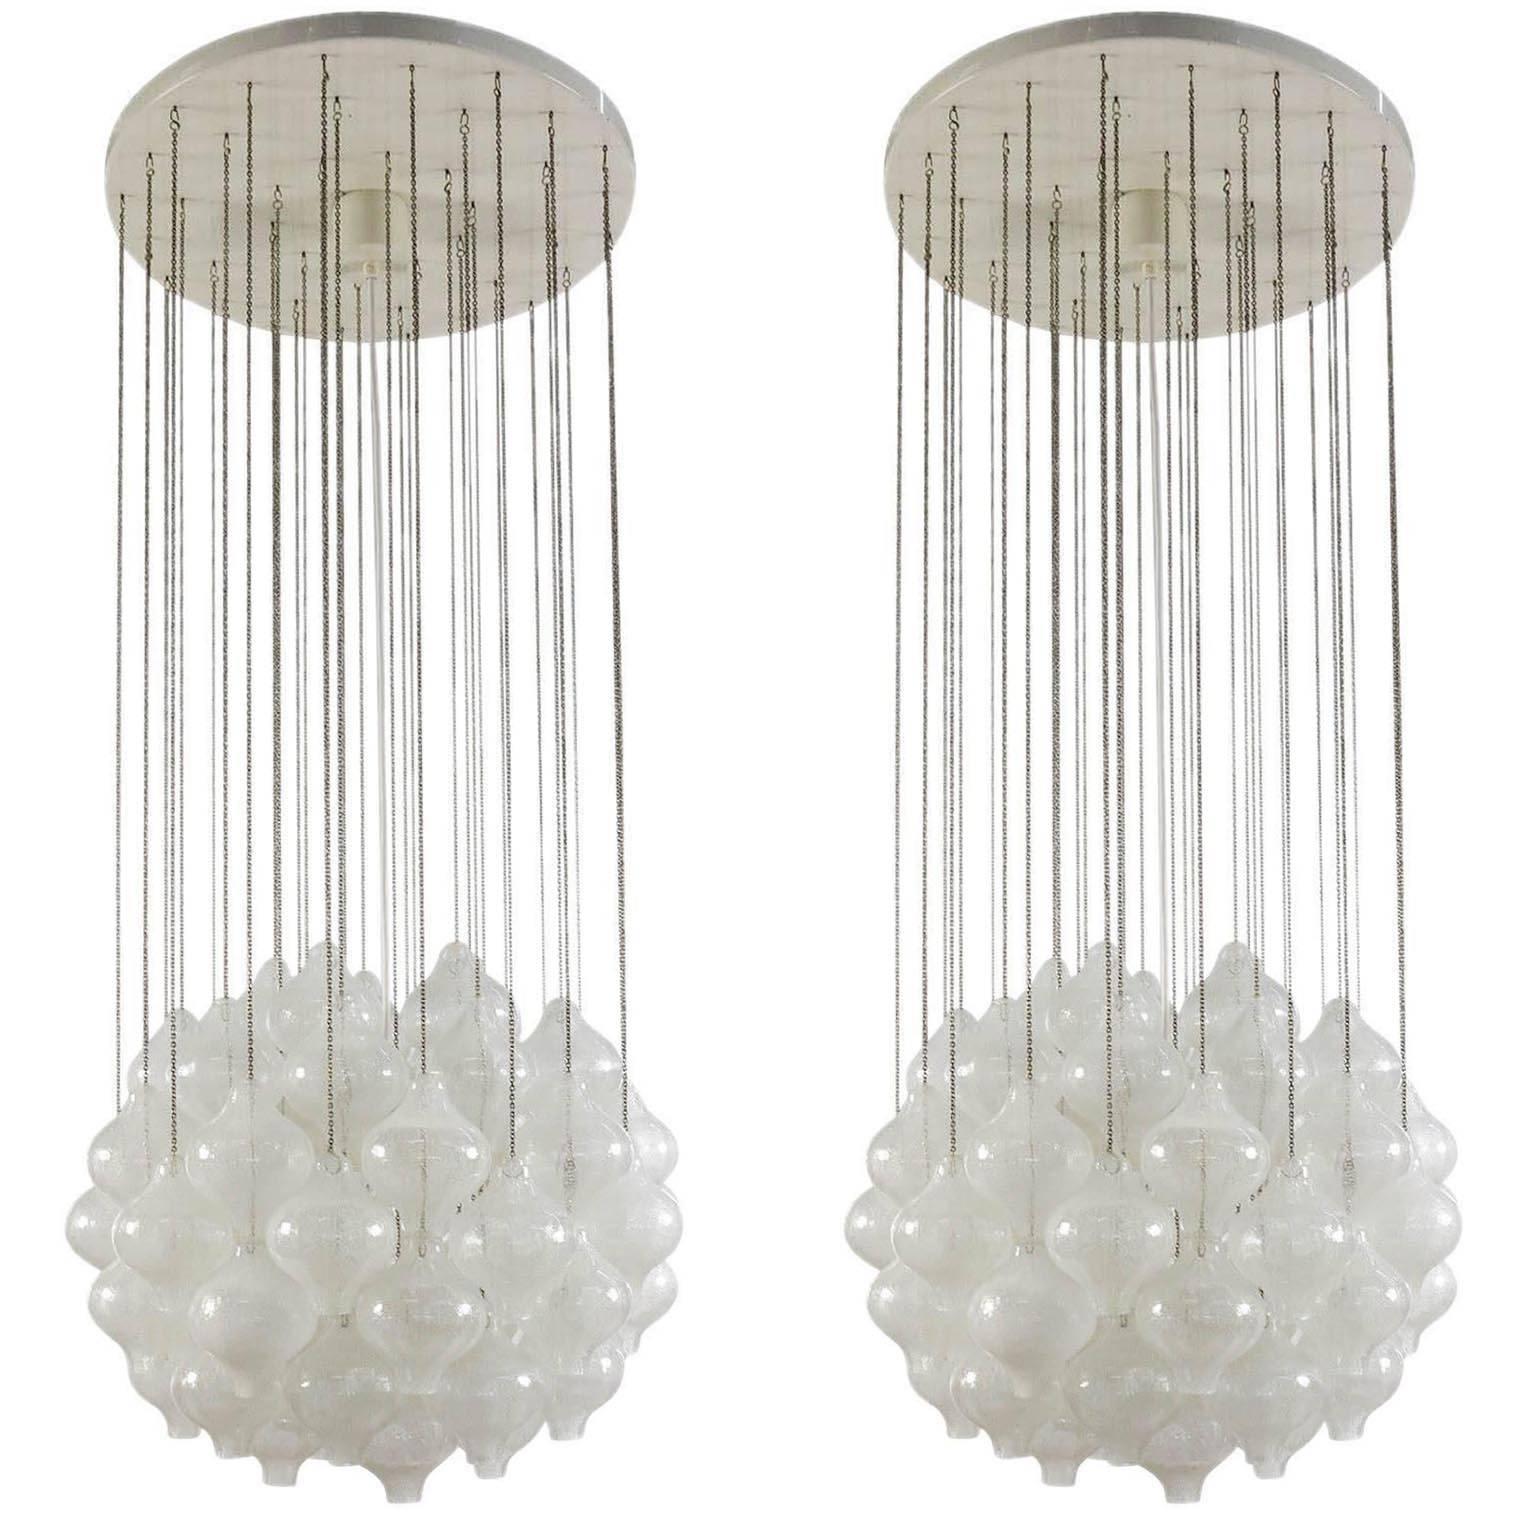 One of two glass pendant chandeliers model 'Tulipan' by J.T. Kalmar, Austria, Vienna, manufactured in Mid-Century, circa 1970 (late 1960s or early 1970s). The name Tulipan derives from the tulip shaped hand-blown bubble glass pieces. Each glass is